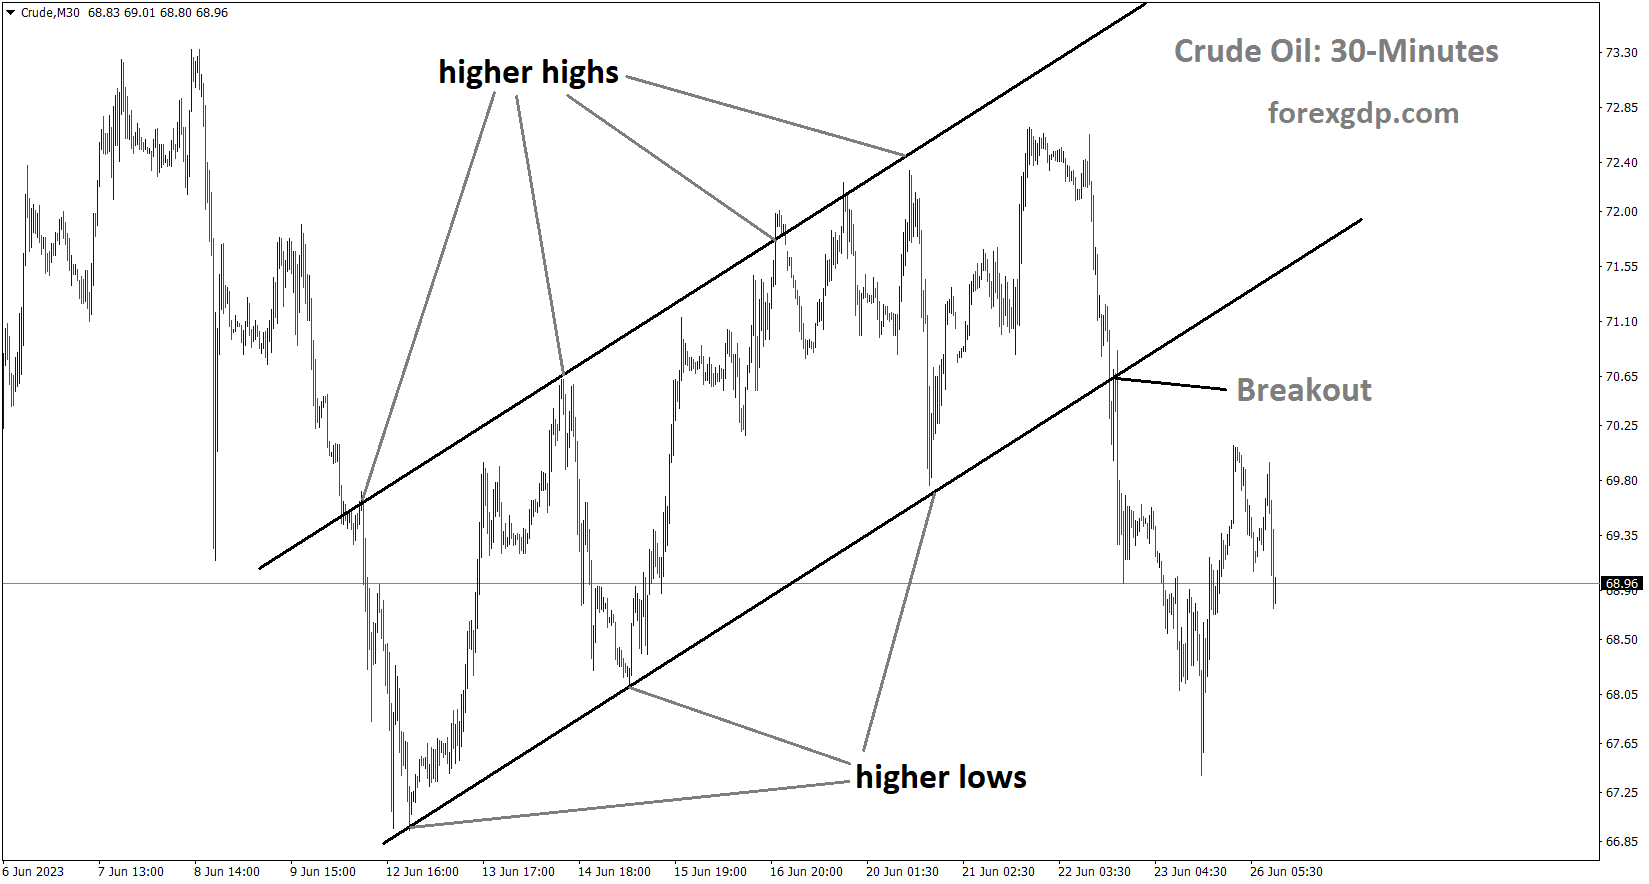 Crude Oil price has broken the Ascending channel in downside